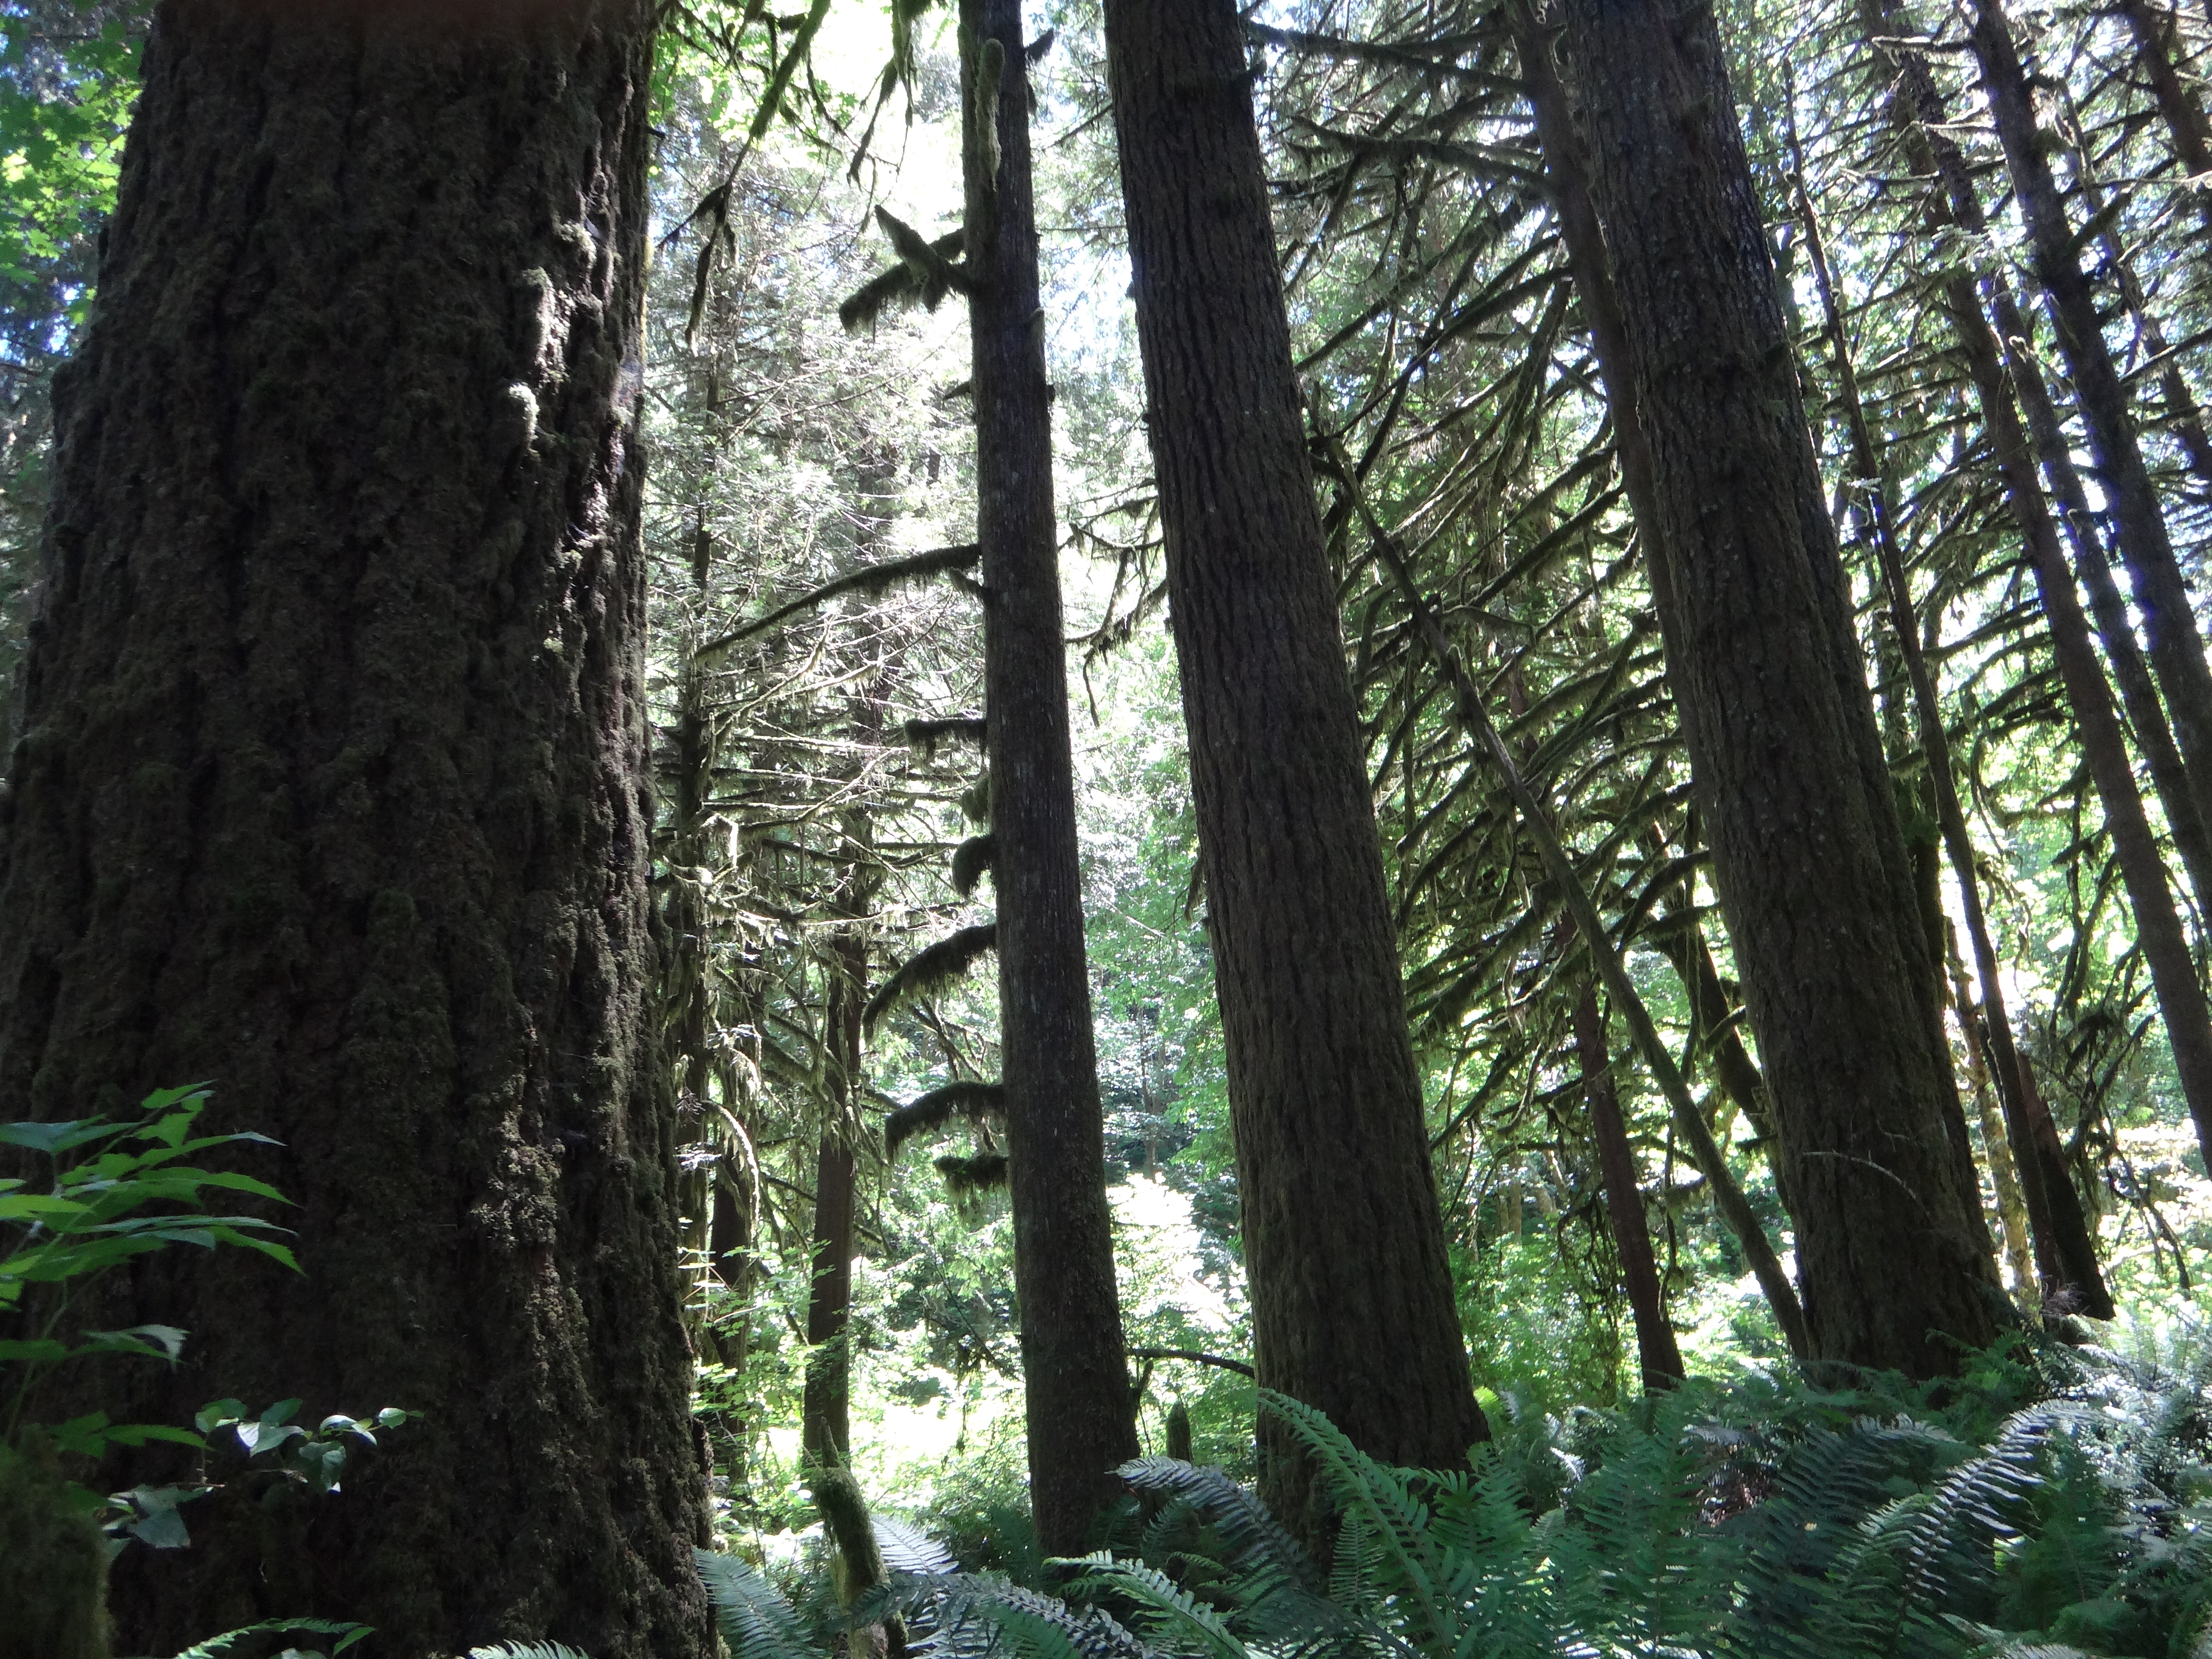 Corporate Greed and Oregon's Forest Waters